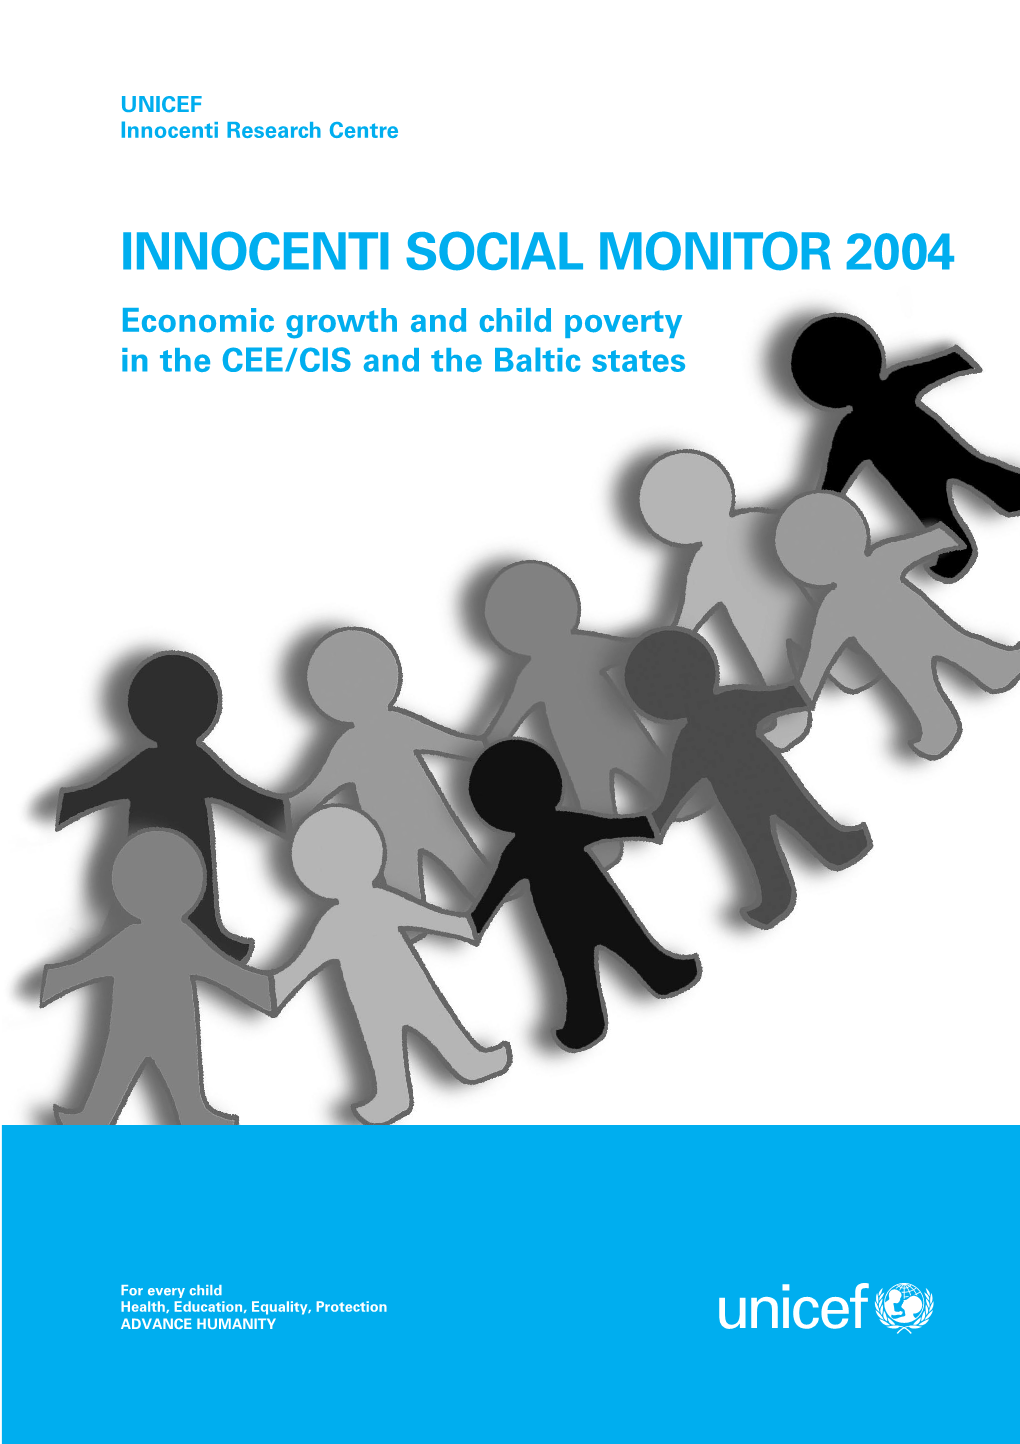 INNOCENTI SOCIAL MONITOR 2004 Economic Growth and Child Poverty in the CEE/CIS and the Baltic States 2-Socialmonitor04 13-05-2005 12:50 Page I